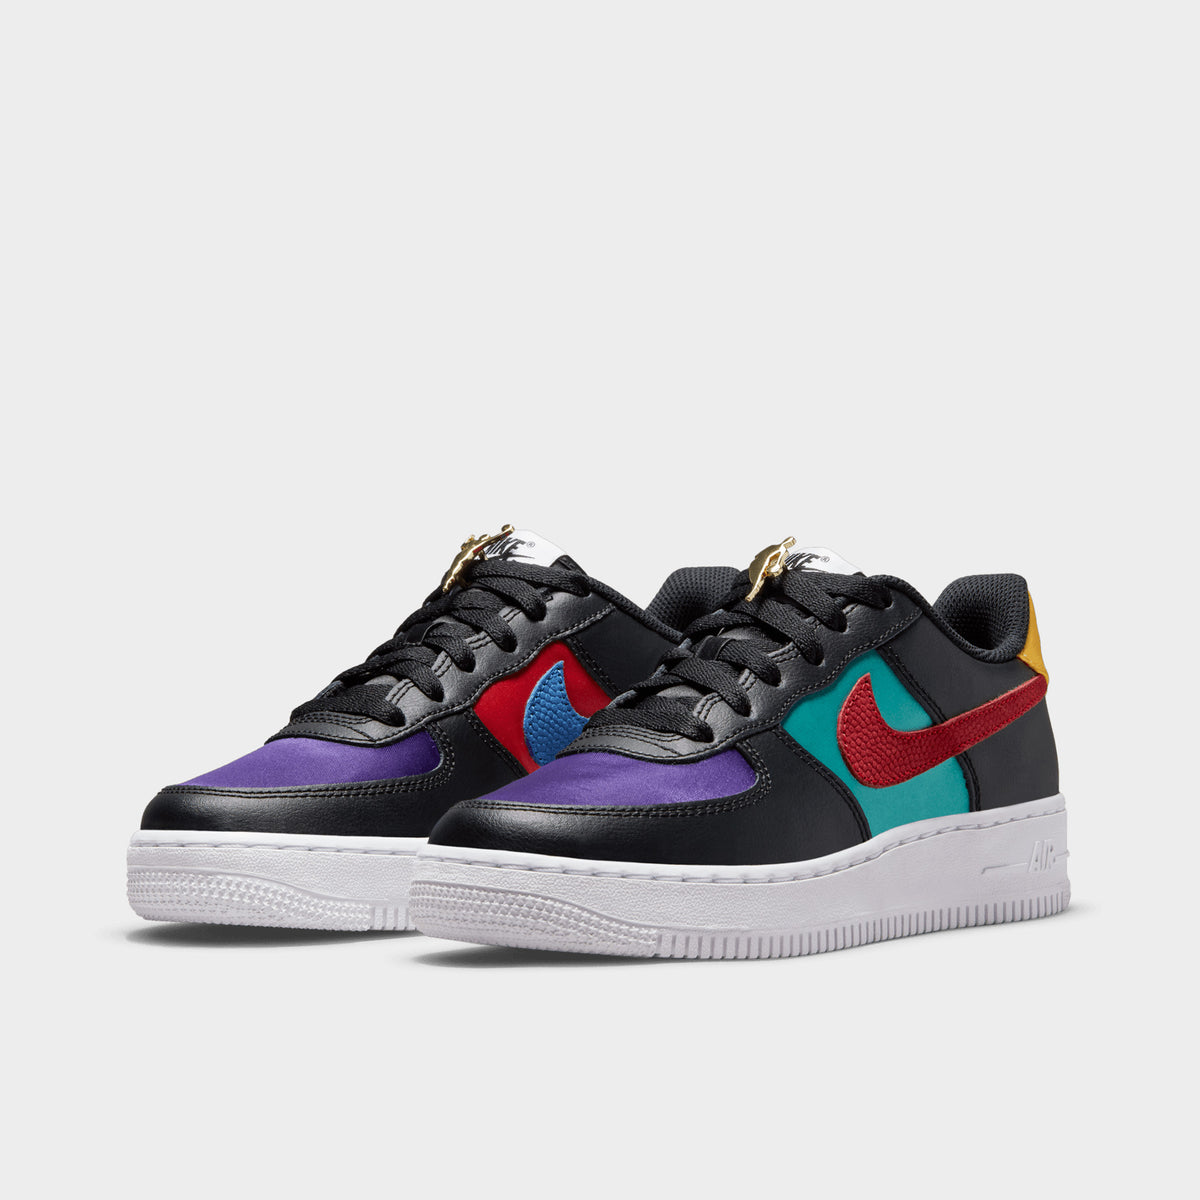 Nike Air Force 1 '07 LV8 EMB GS Black / Gym Red - Washed Teal